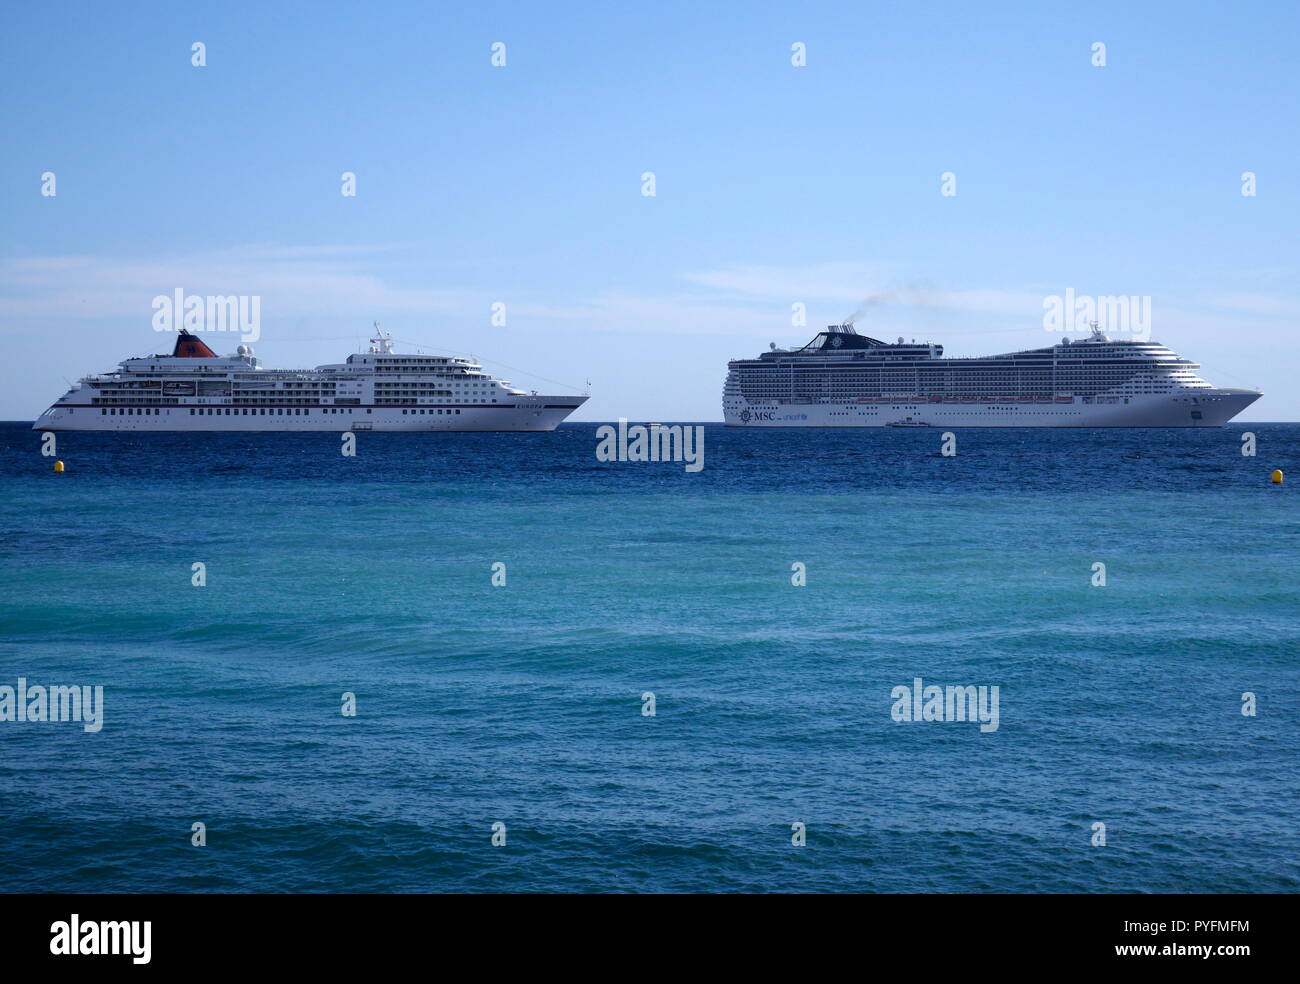 AJAXNETPHOTO. 2018. CANNES, FRANCE. - COTE D'AZUR RESORT - THE HAPAG LLOYD CRUISE LINER EUROPA (L) AND MSC FANTASIA ANCHORED IN THE BAY. PHOTO:JONATHAN EASTLAND/AJAX REF:GX8 180310 771 Stock Photo